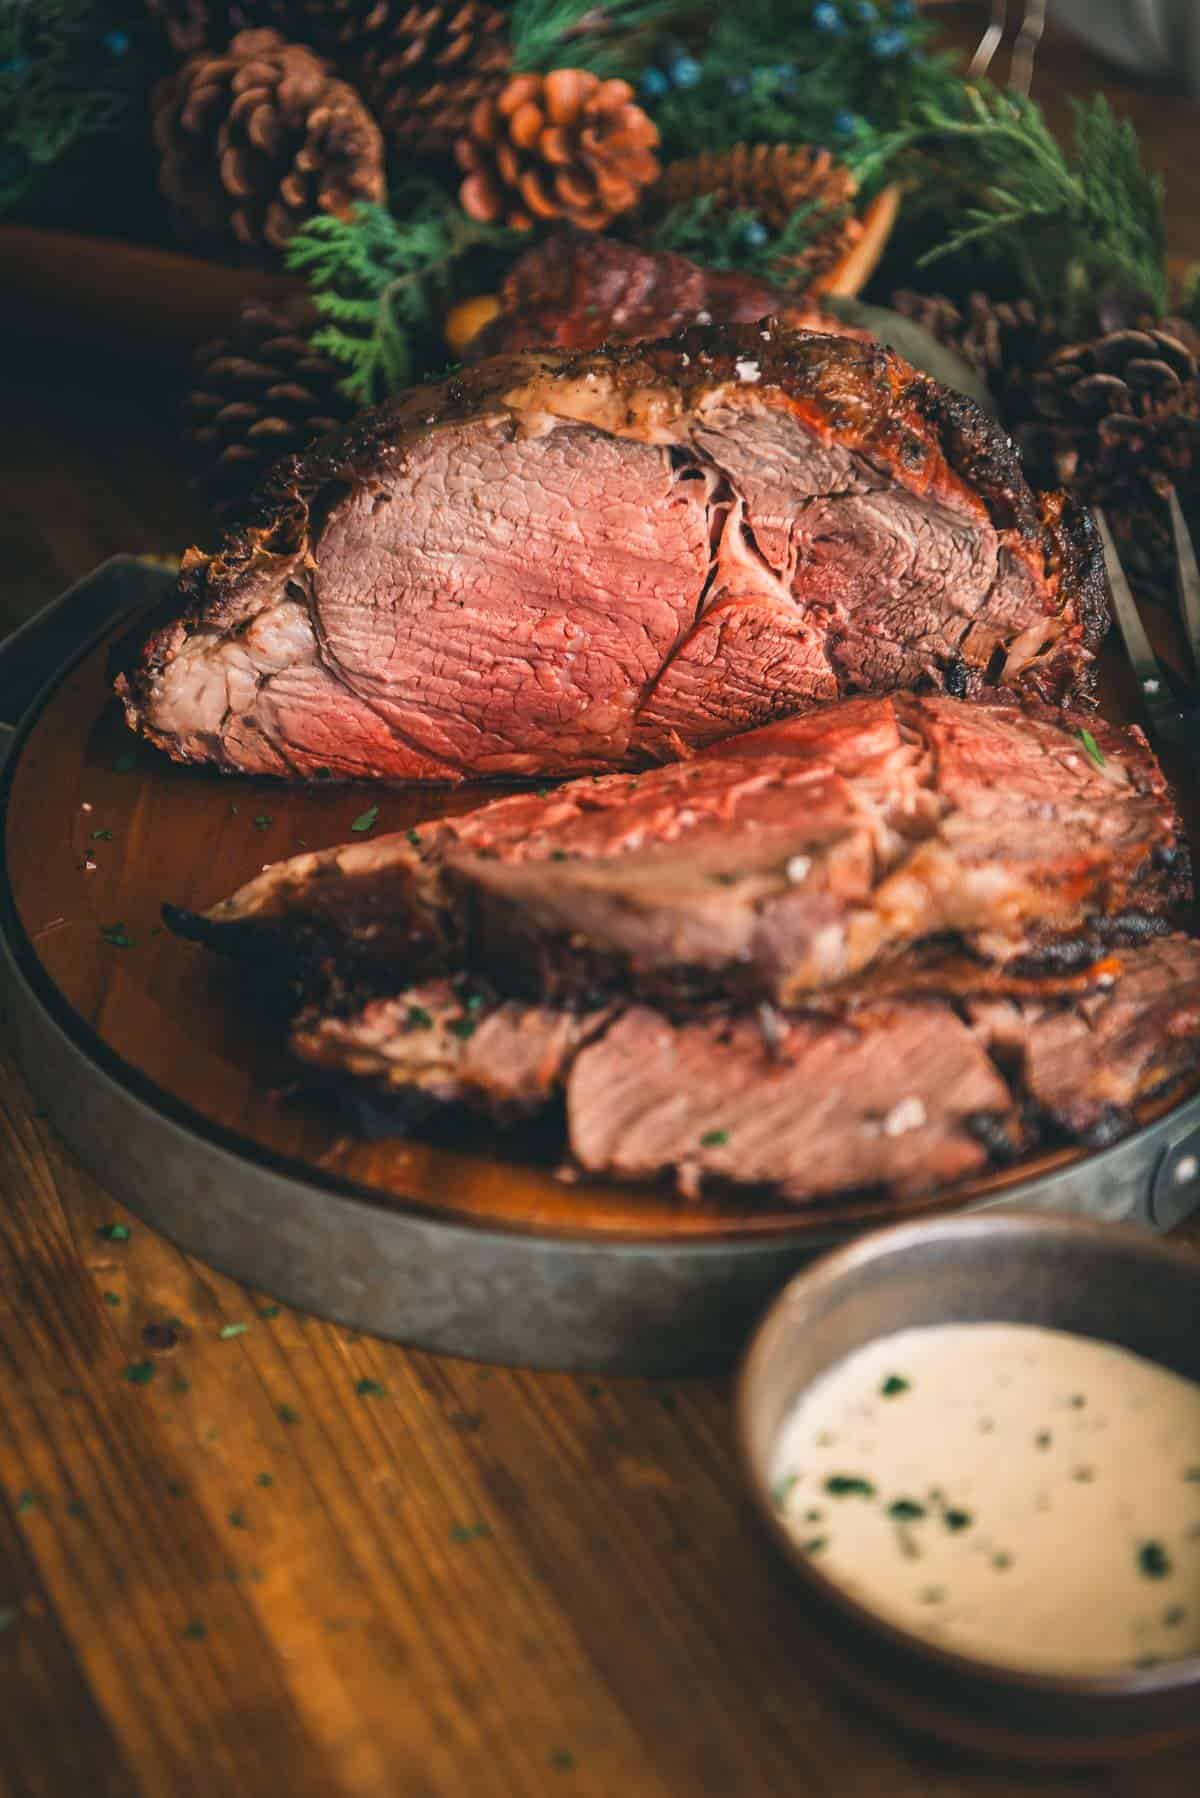 A standing rib roast with sauce and pine cones on a wooden table.